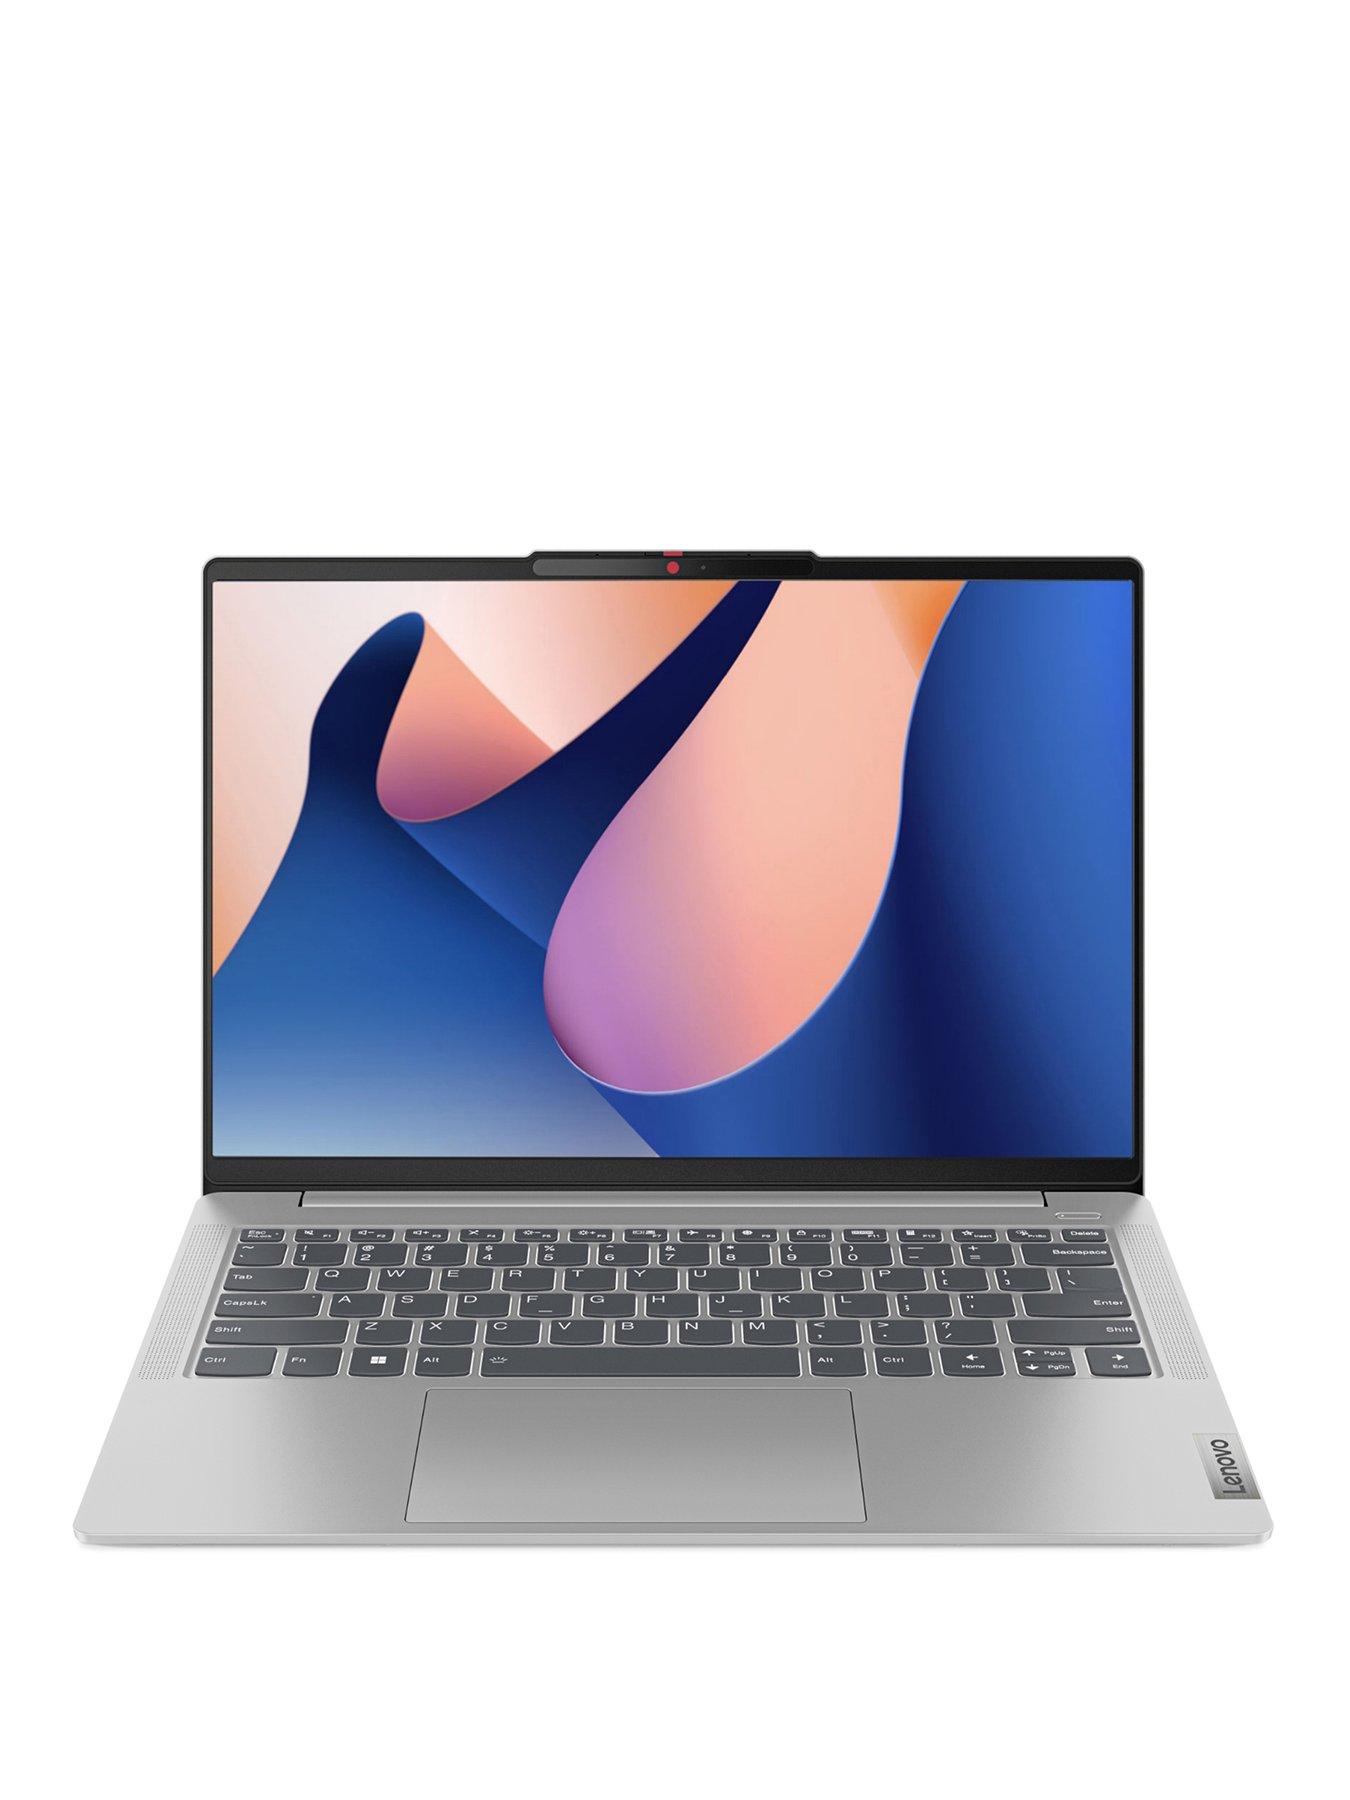 ASUS VivoBook Go 14 Flip Thin and Light 2-in-1 Laptop, 14” HD Touch, Intel  Celeron N4500 CPU, UHD Graphics, 4GB RAM, 64GB eMMC, NumberPad, Windows 11  Home in S mode, Quiet Blue